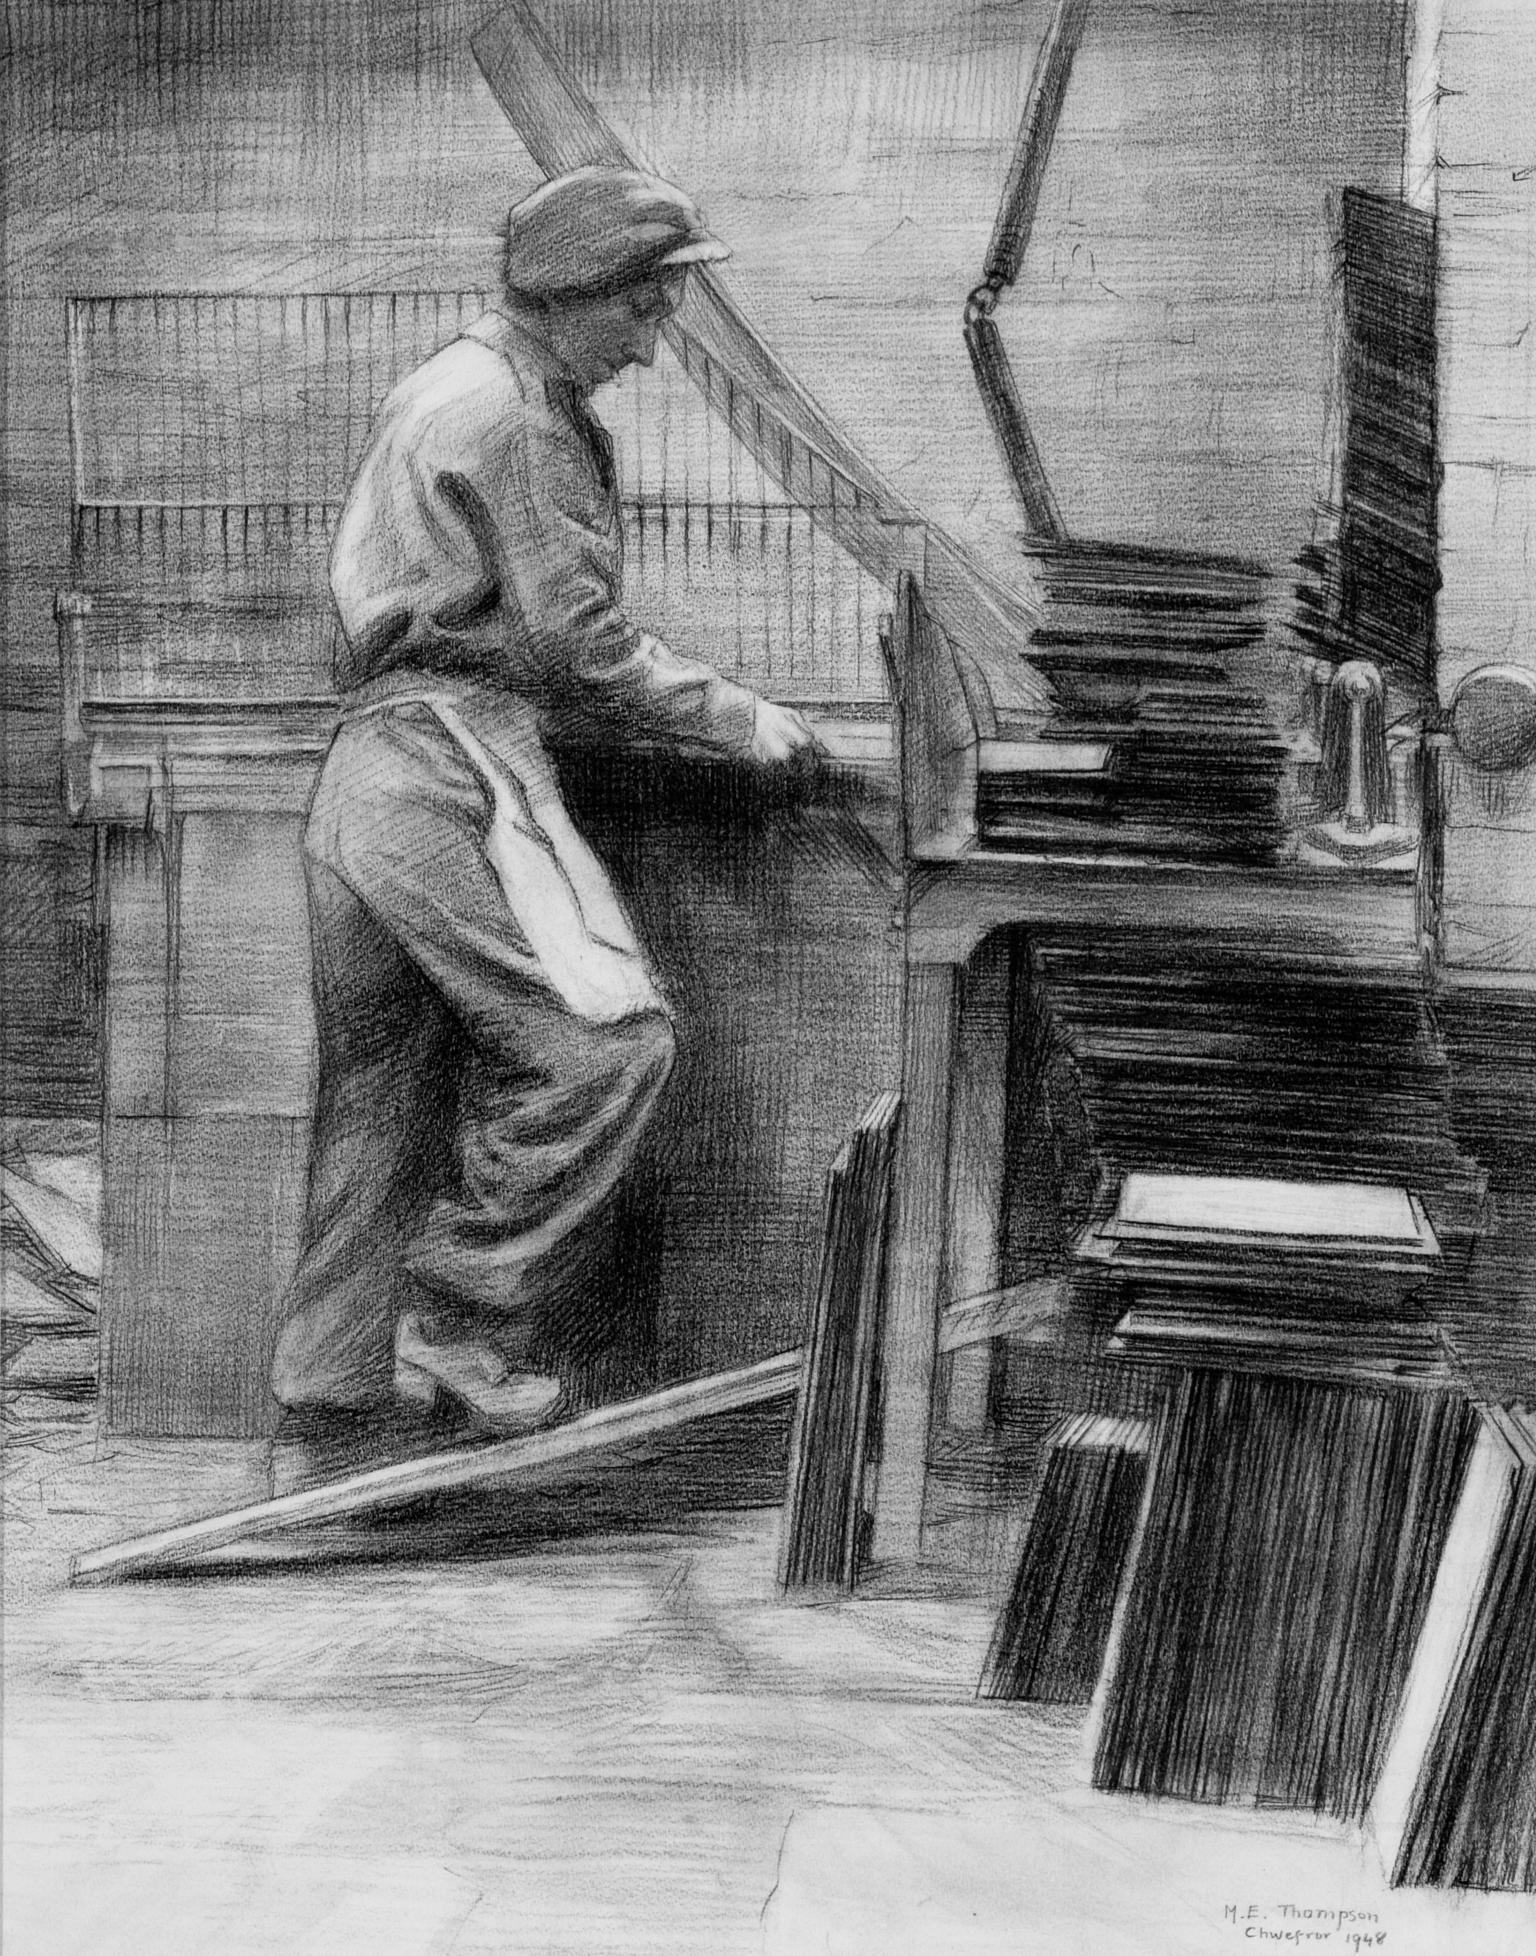 Slate Trimmer and Guillotine (drawing)